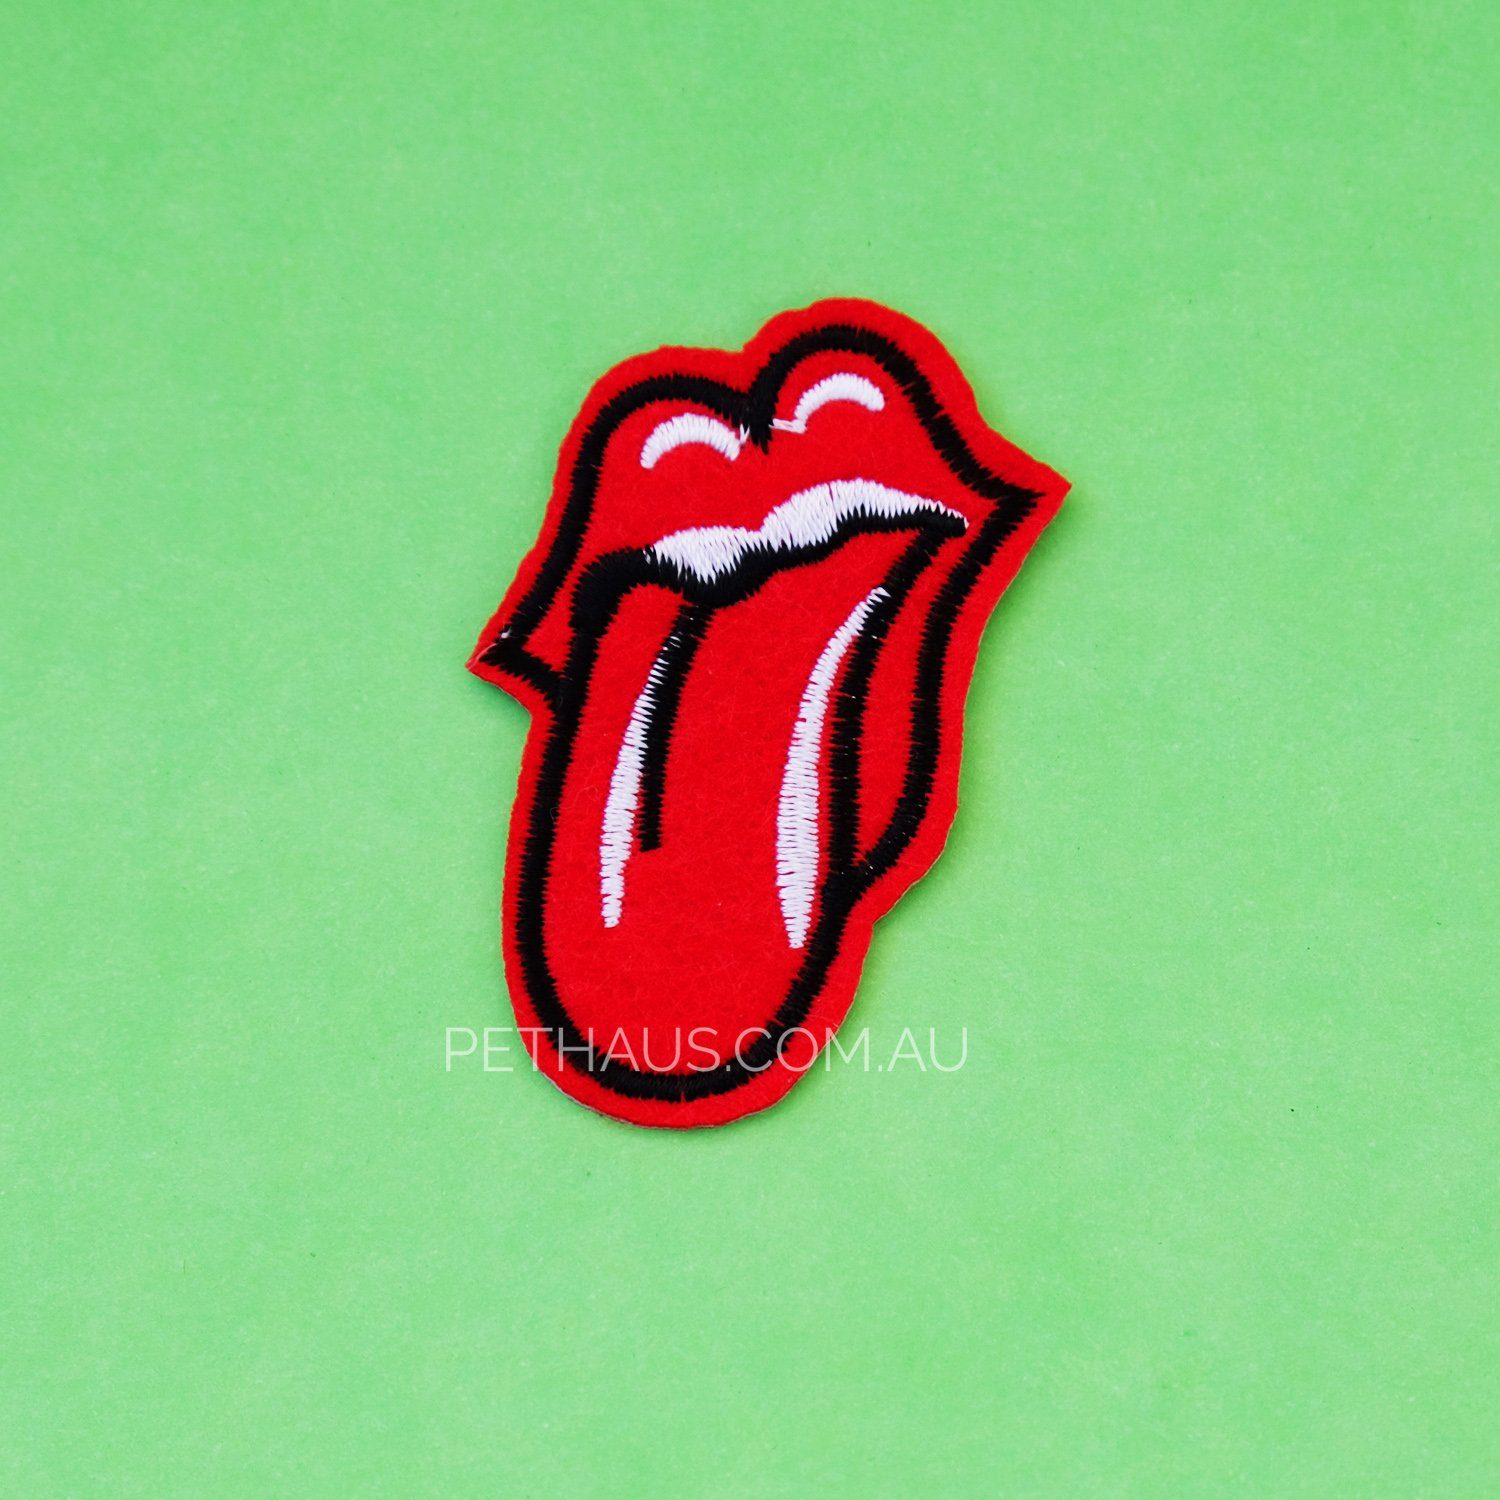 rolling stones patch, rolling stones tongue patch, band patch